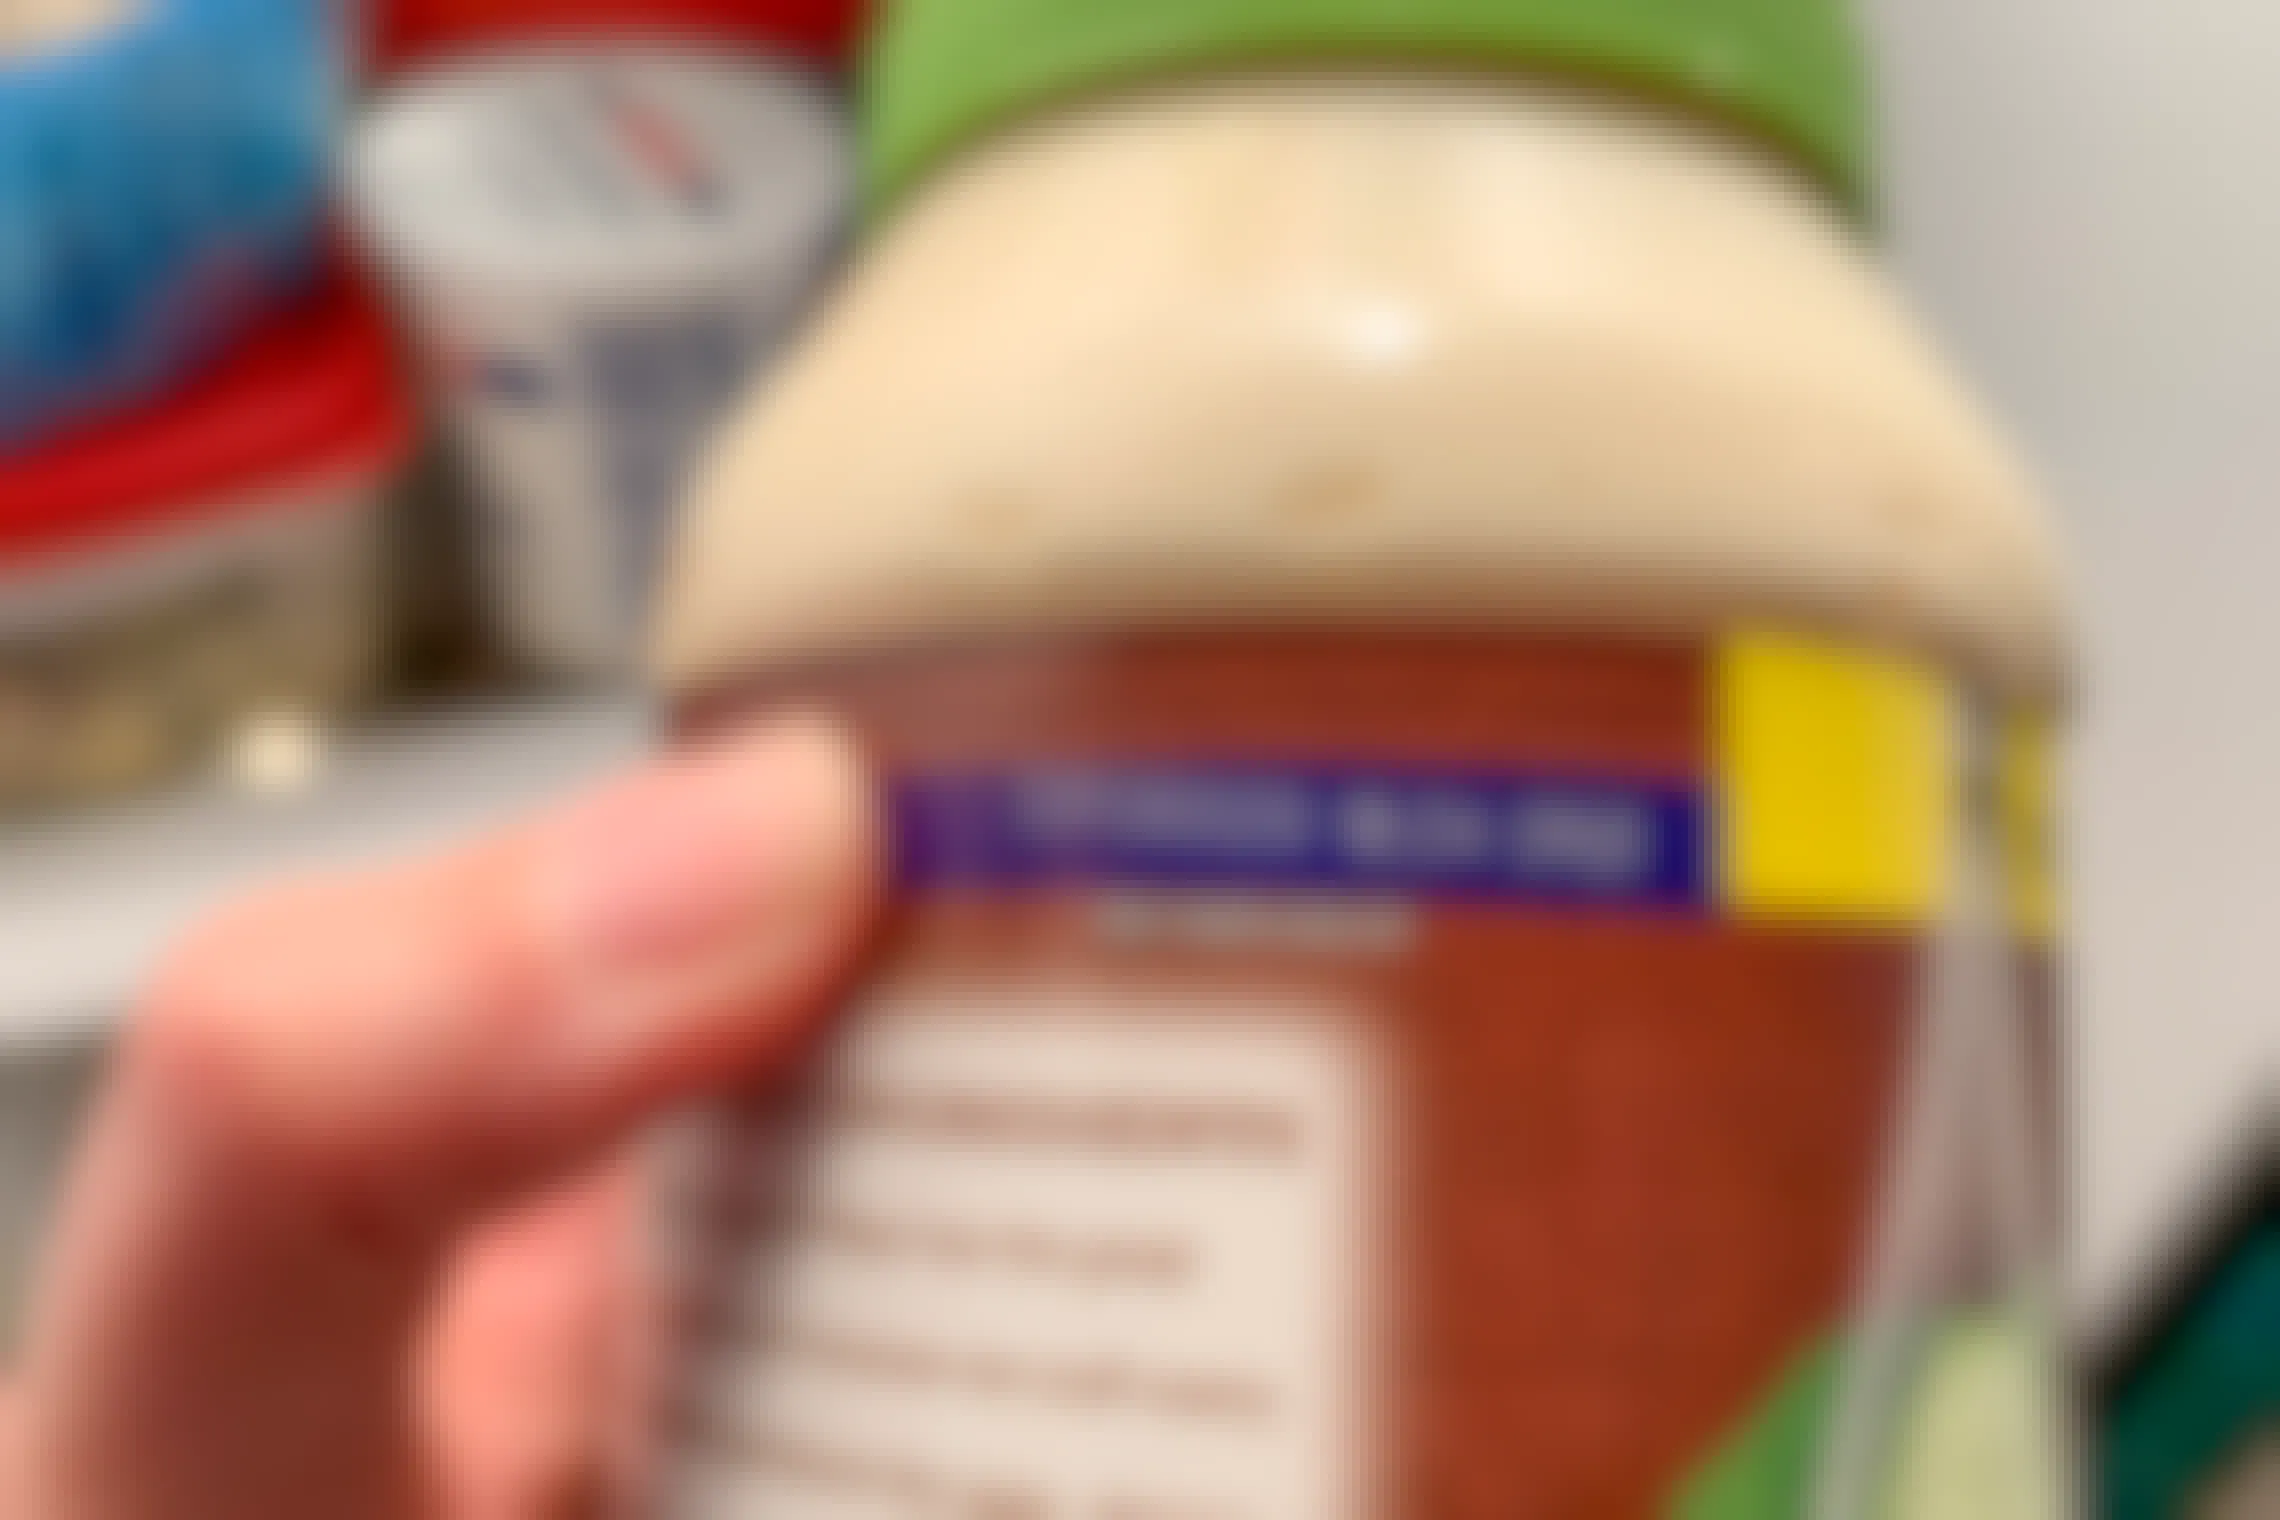 Person pointing to the expiration date on newly expired mayo.